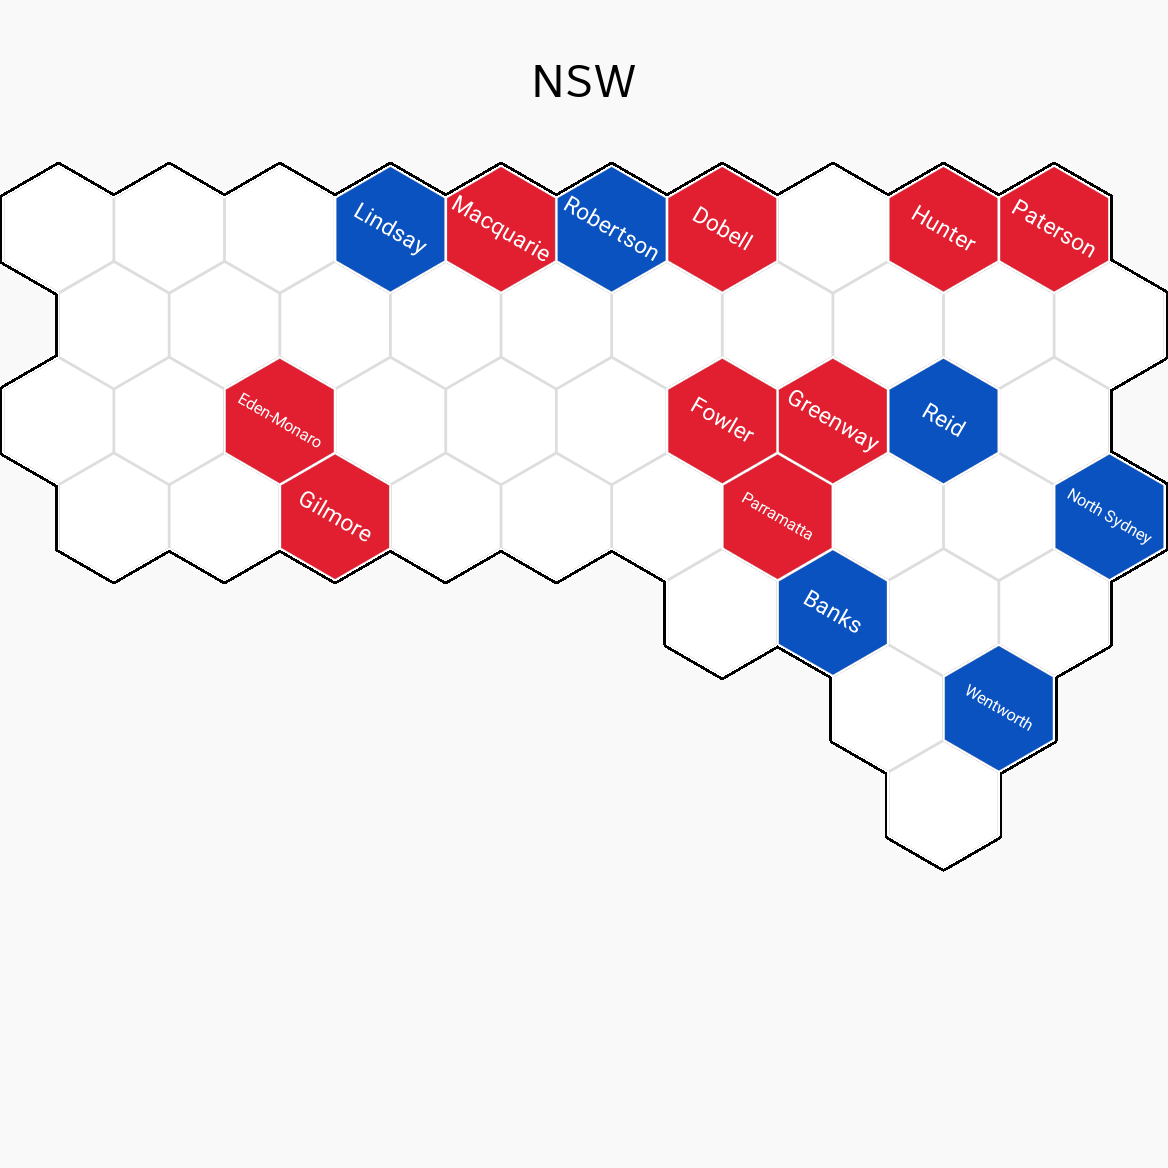 A white map of New South Wales divided up into hexagonal shapes, with some of the shapes coloured in red, blue or grey..